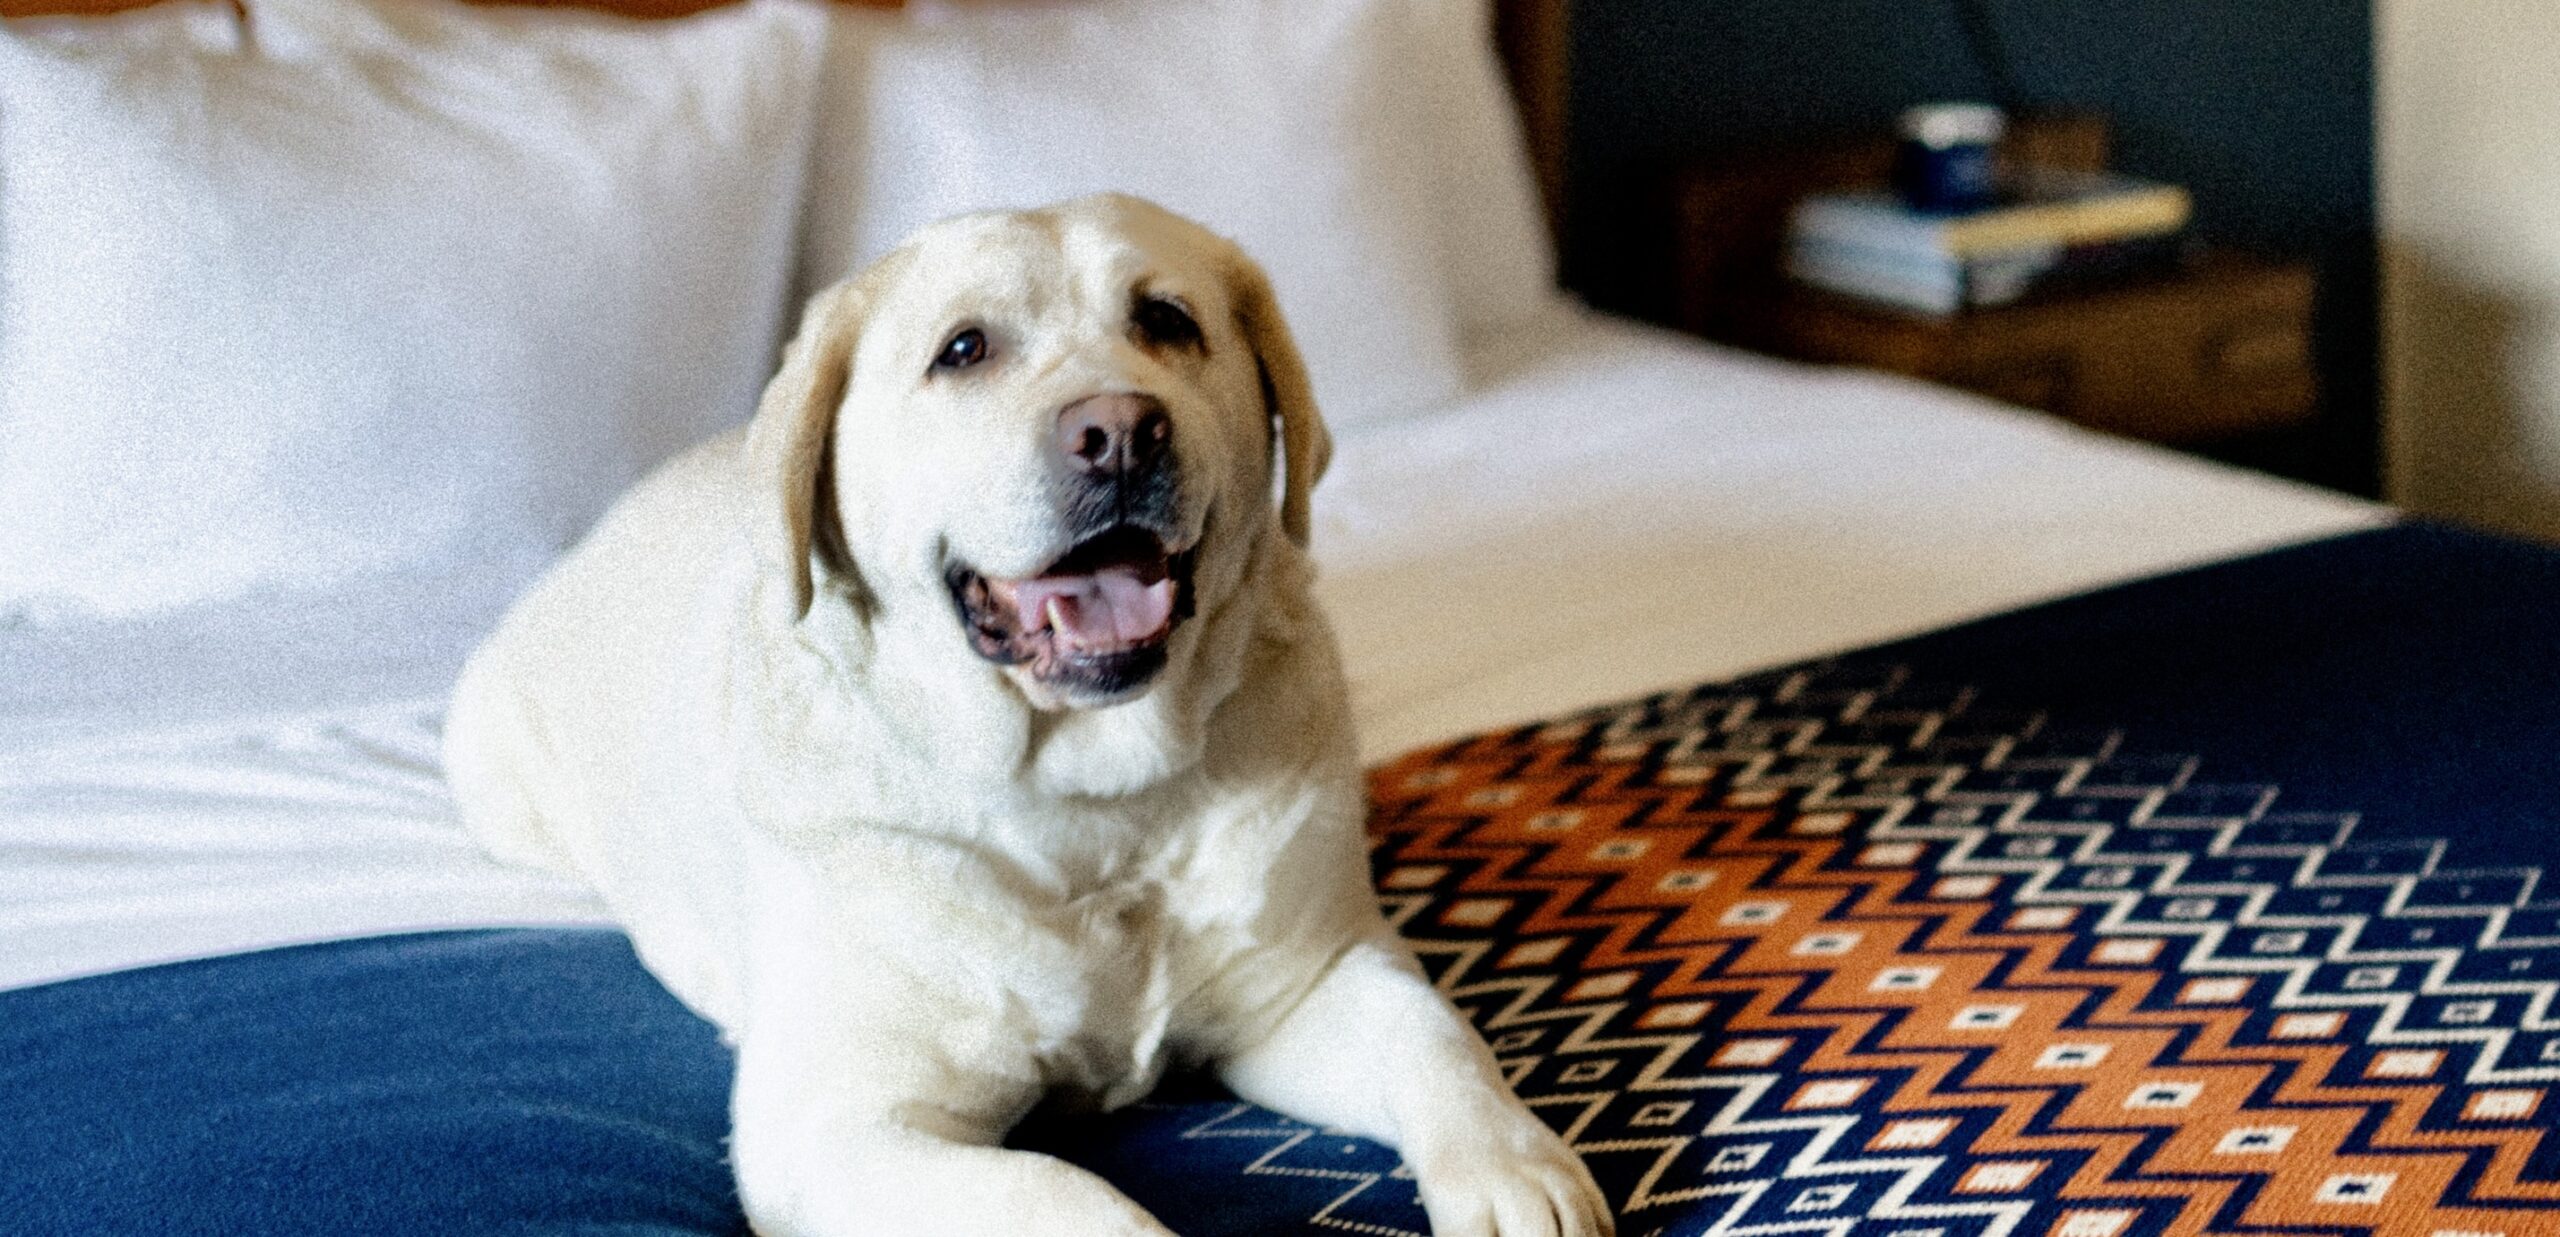 A white dog rests peacefully on a comfortable bed, embracing a moment of serene tranquility.